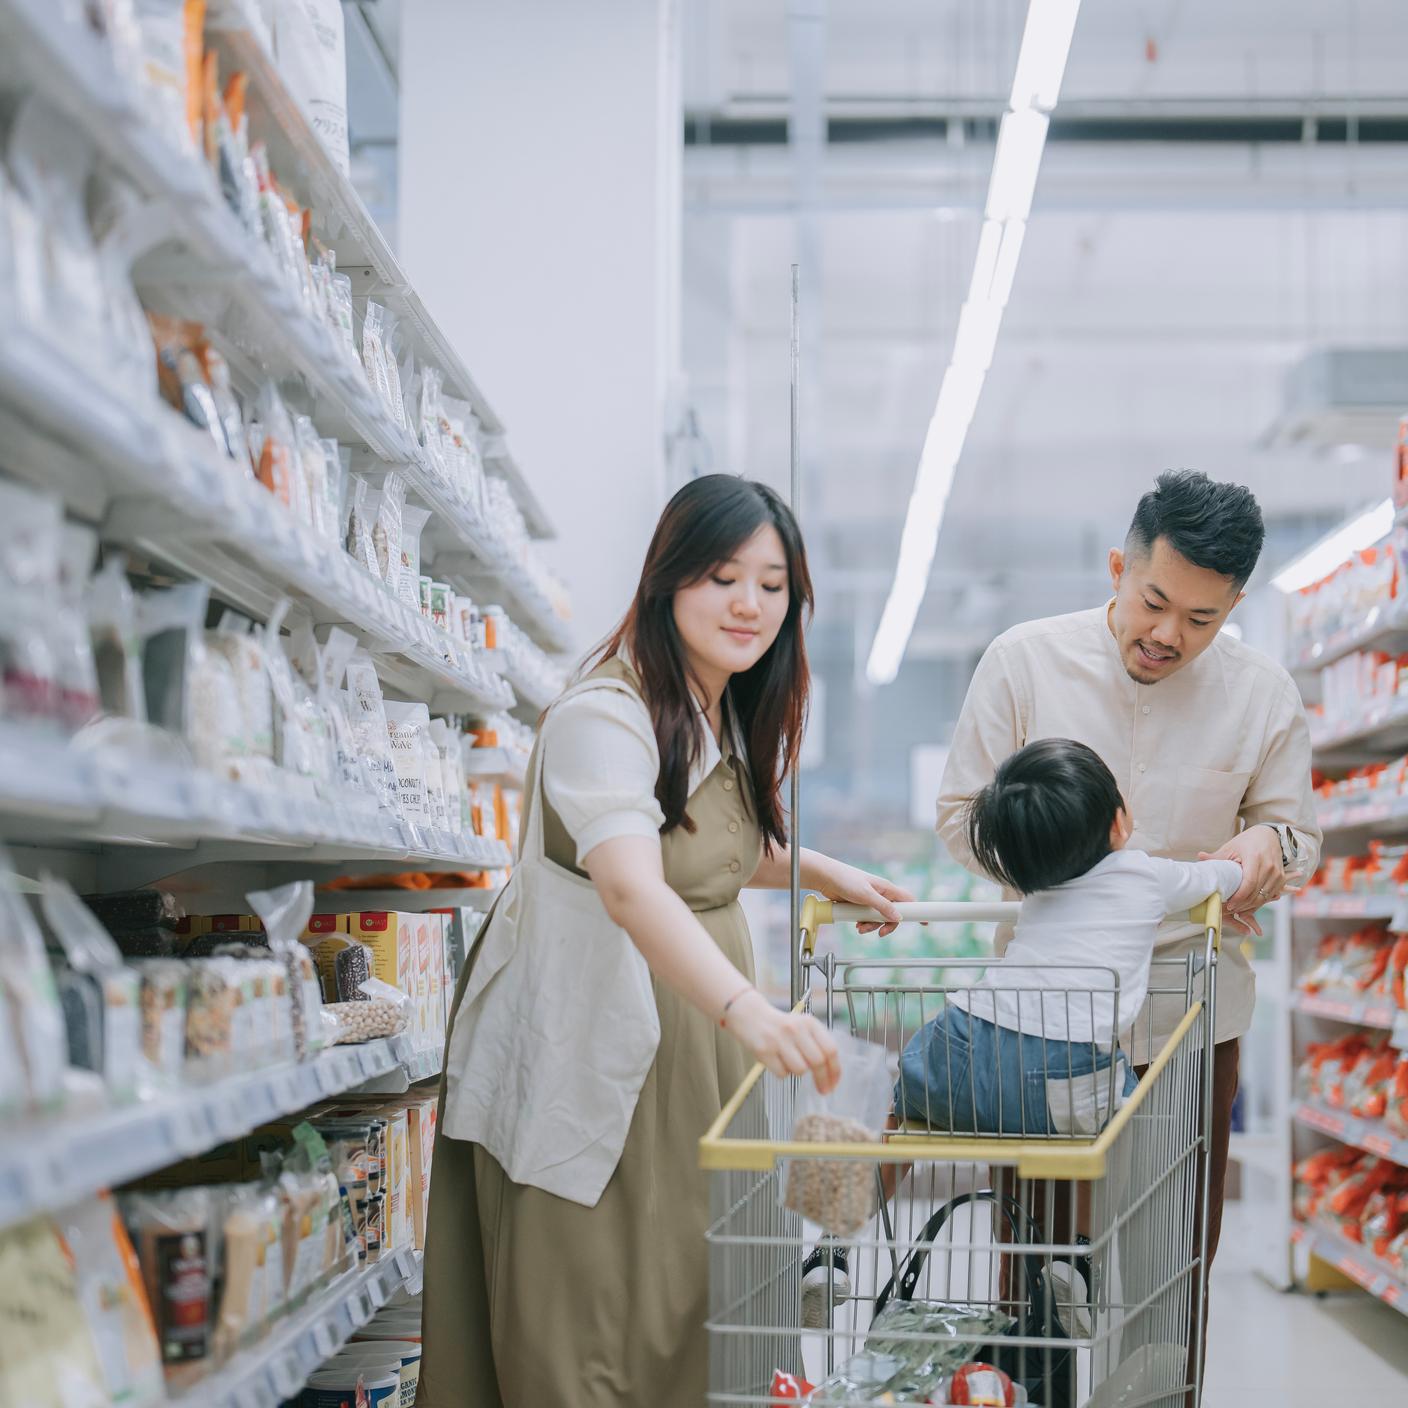 PAS 2050 2 - Asian Chinese family buying groceries in supermarket